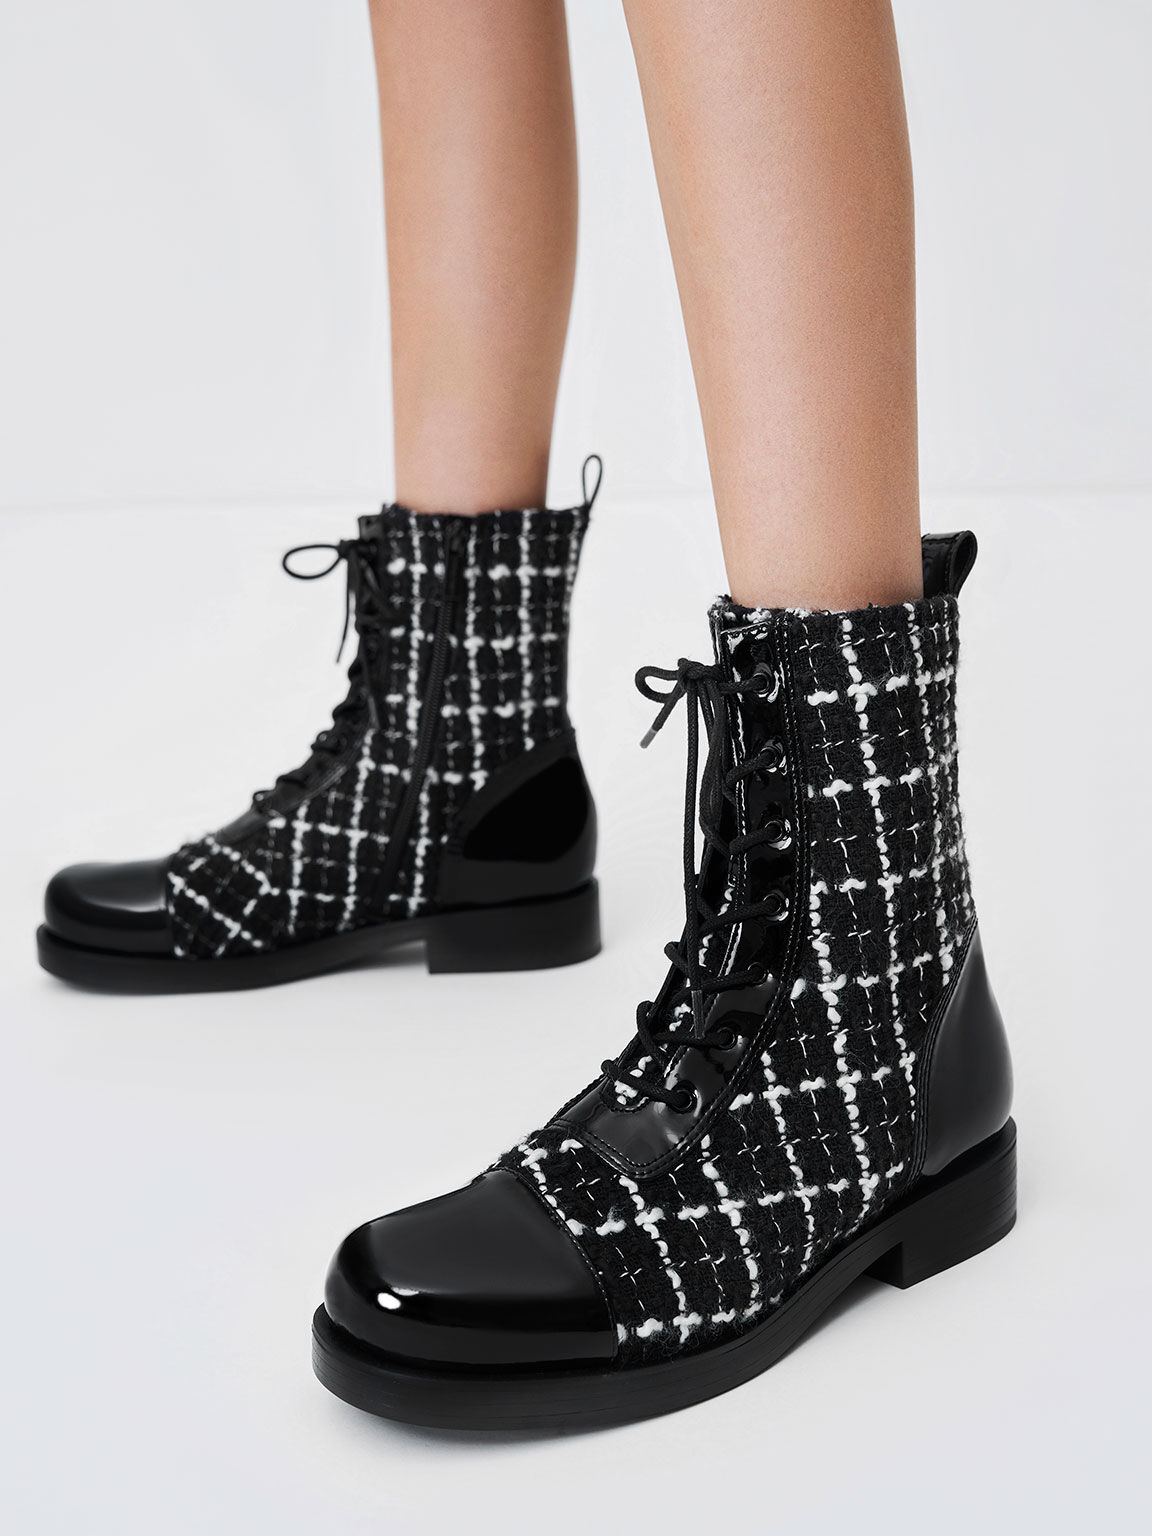 Madam Duty cloth Black Textured Tweed & Patent Combat Boots - CHARLES & KEITH SK